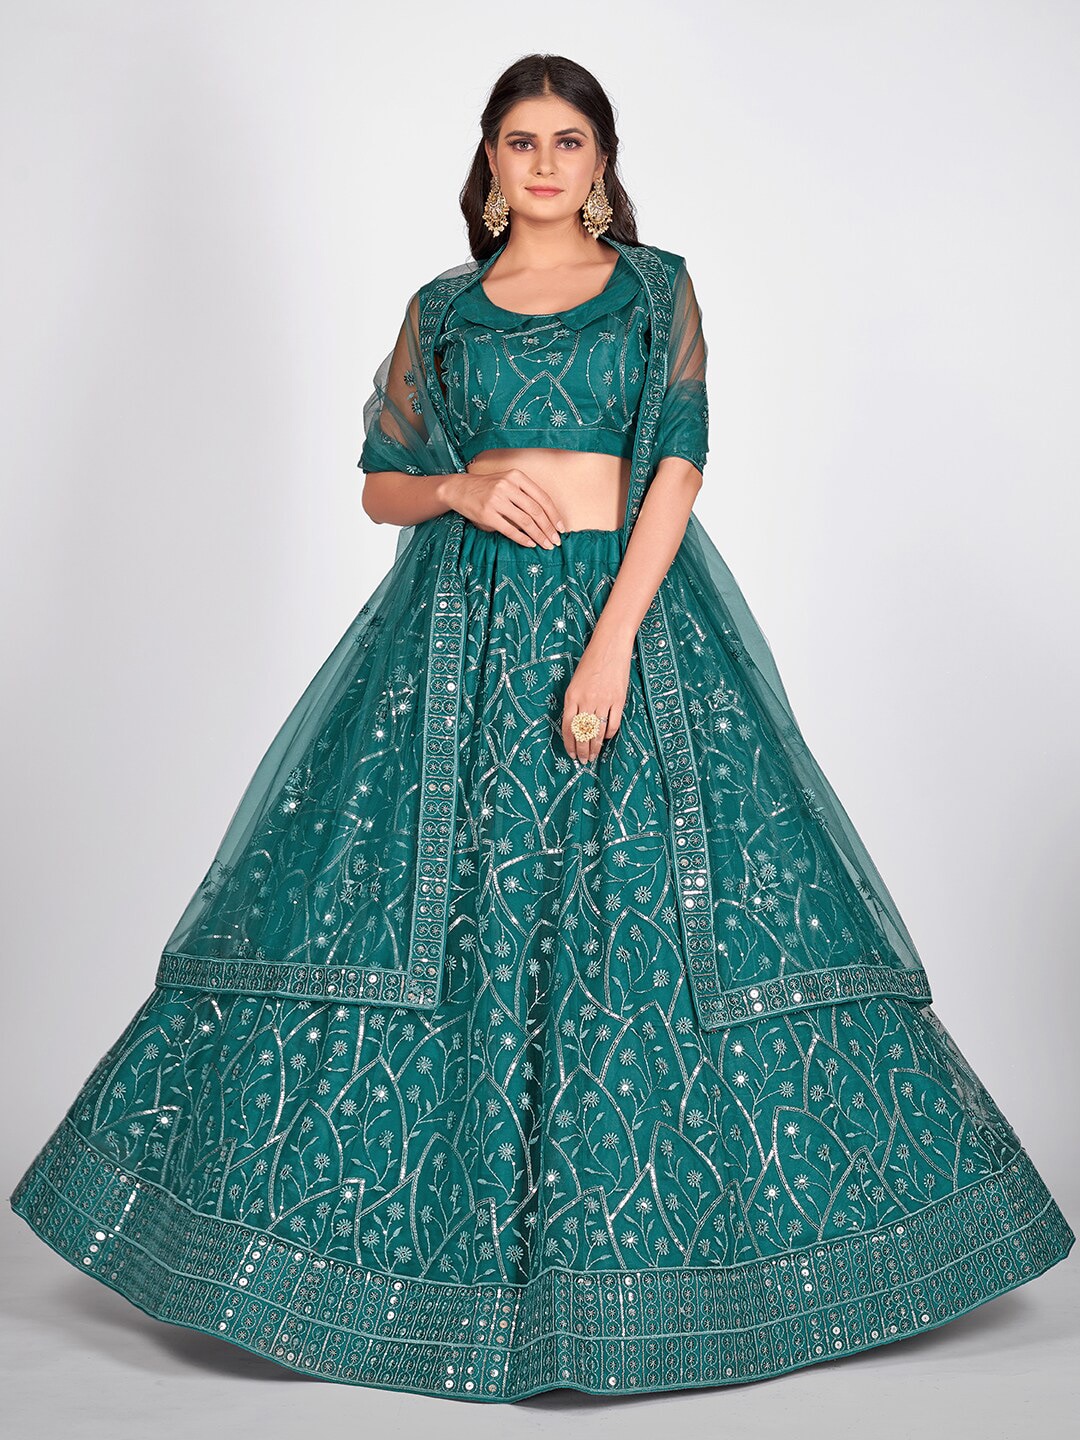 SHOPGARB Teal & Silver-Toned Semi-Stitched Lehenga & Unstitched Blouse With Dupatta Price in India